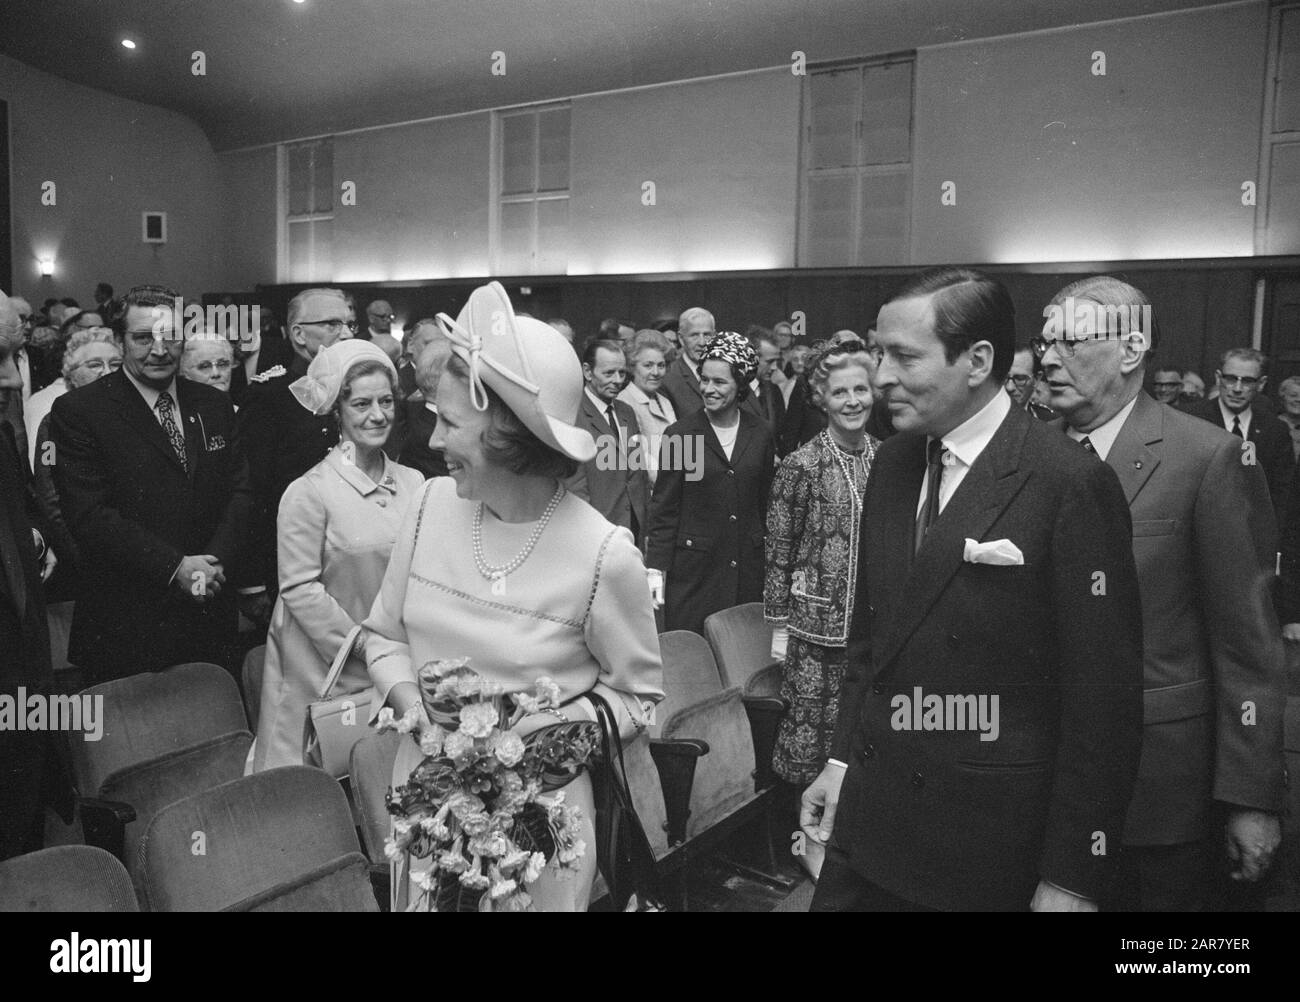 Princess Beatrix and Prince Claus at Expoge congress in K Breda  Princess Beatrix and Prince Claus Annotation: Expogé is the former Association of Ex-Political Prisoners from the occupation period Date: 16 June 1971 Location: Breda, Noord-Brabant Keywords: conferences, war victims, princes, princesses Personal name: Beatrix (princess Netherlands), Claus (prince Netherlands) Stock Photo